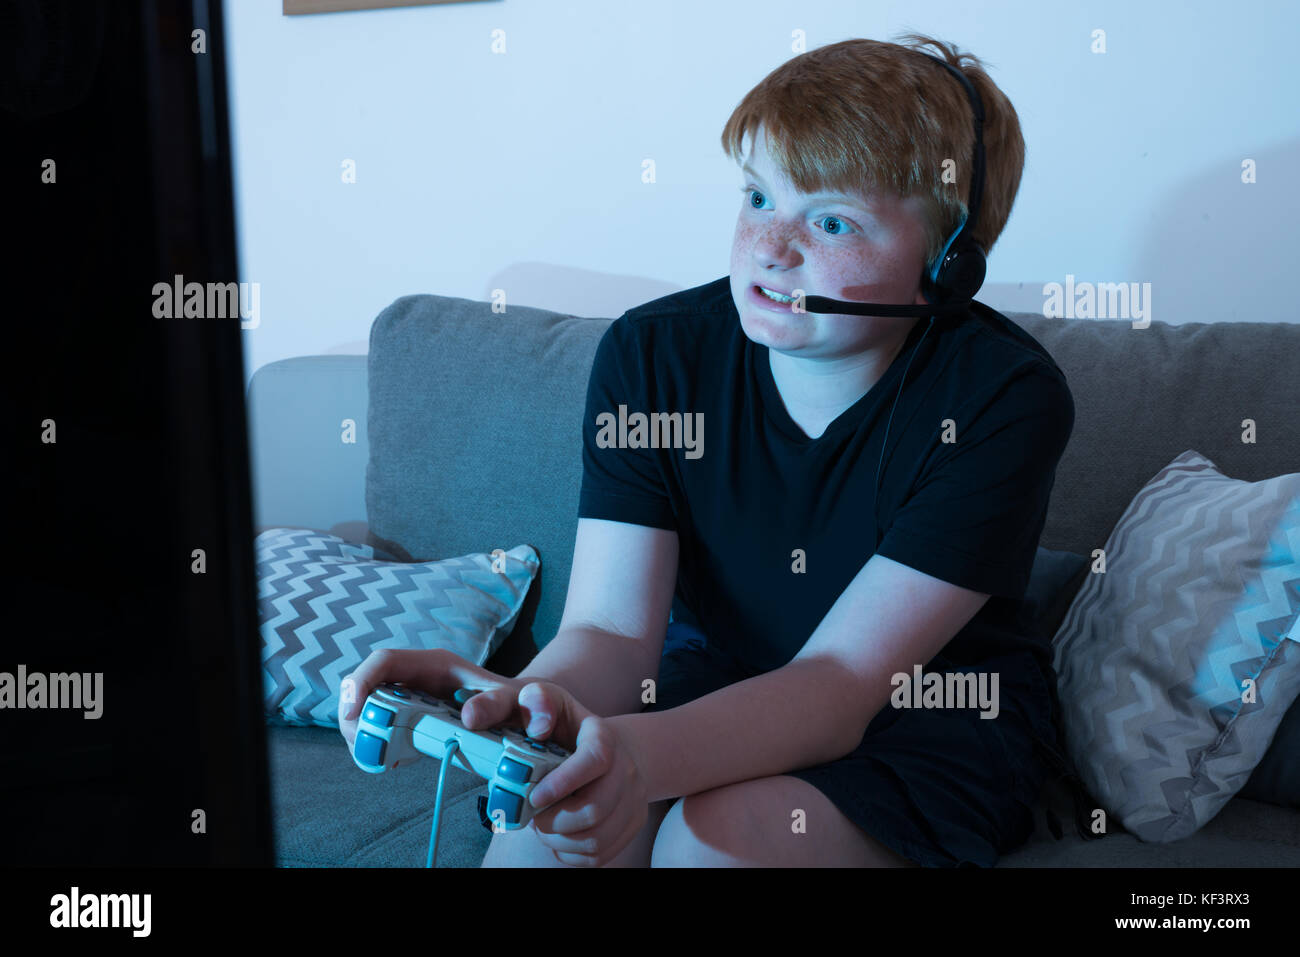 Kid Playing Video Games Stock Photo